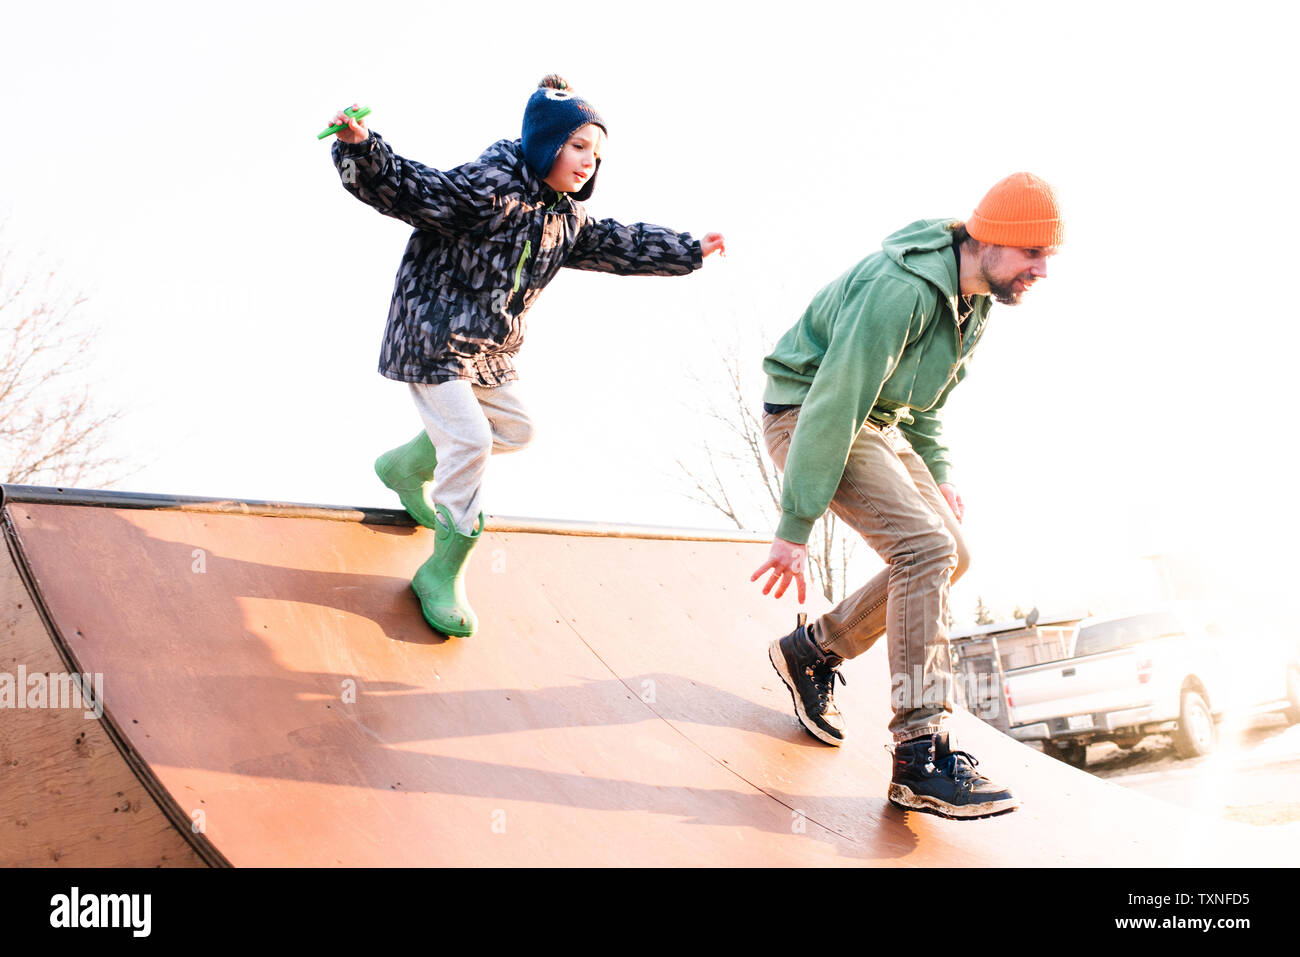 Boy chasing father on skateboard ramp, low angle view Stock Photo